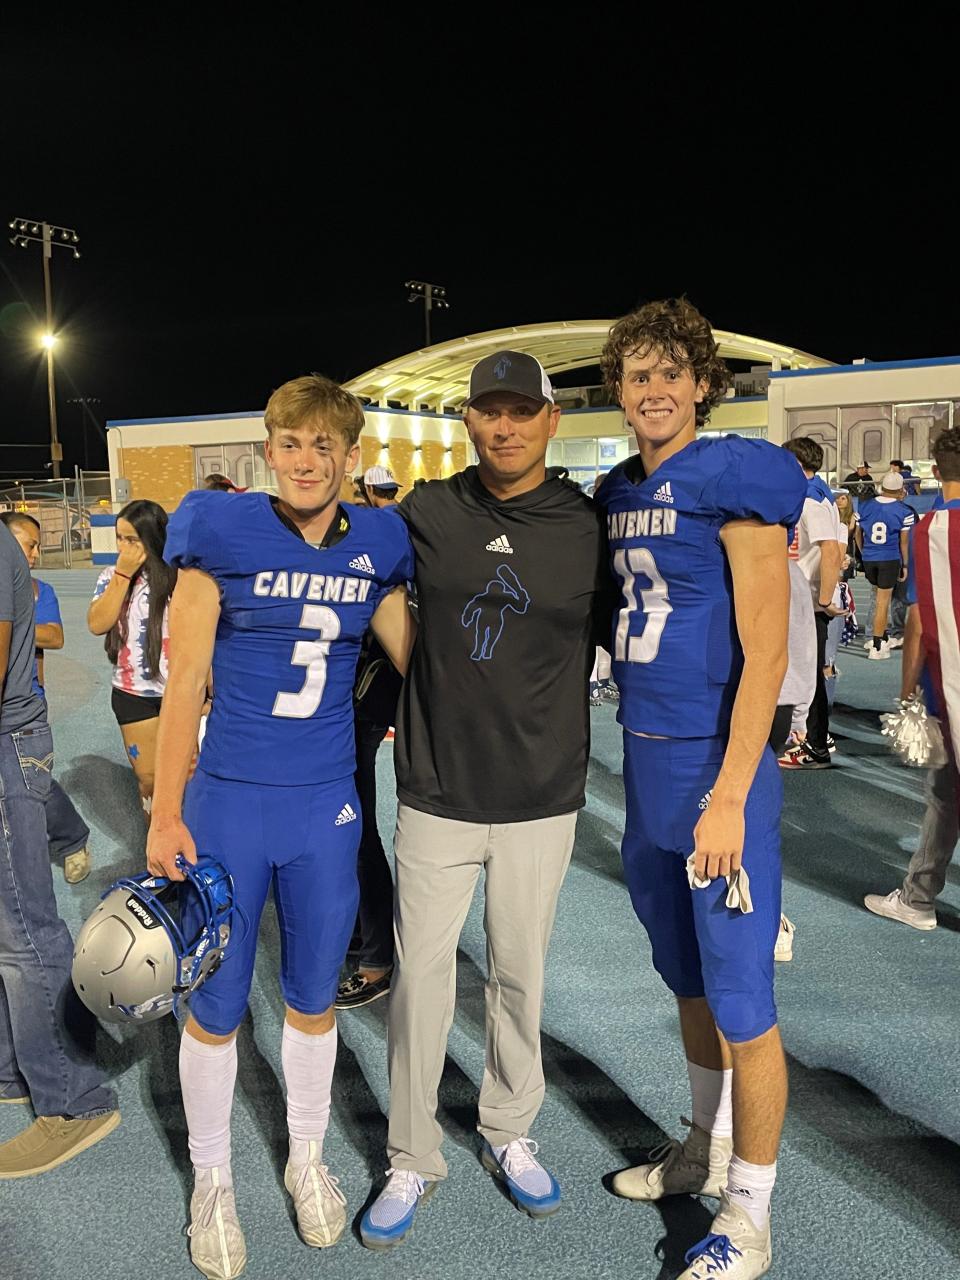 (From left)-Eli Asay, new Carlsbad High School head football coach Cale Sanders and Dane Naylor pose for a picture after a football game in 2022. Sanders was named head coach on Jan. 30, 2023.